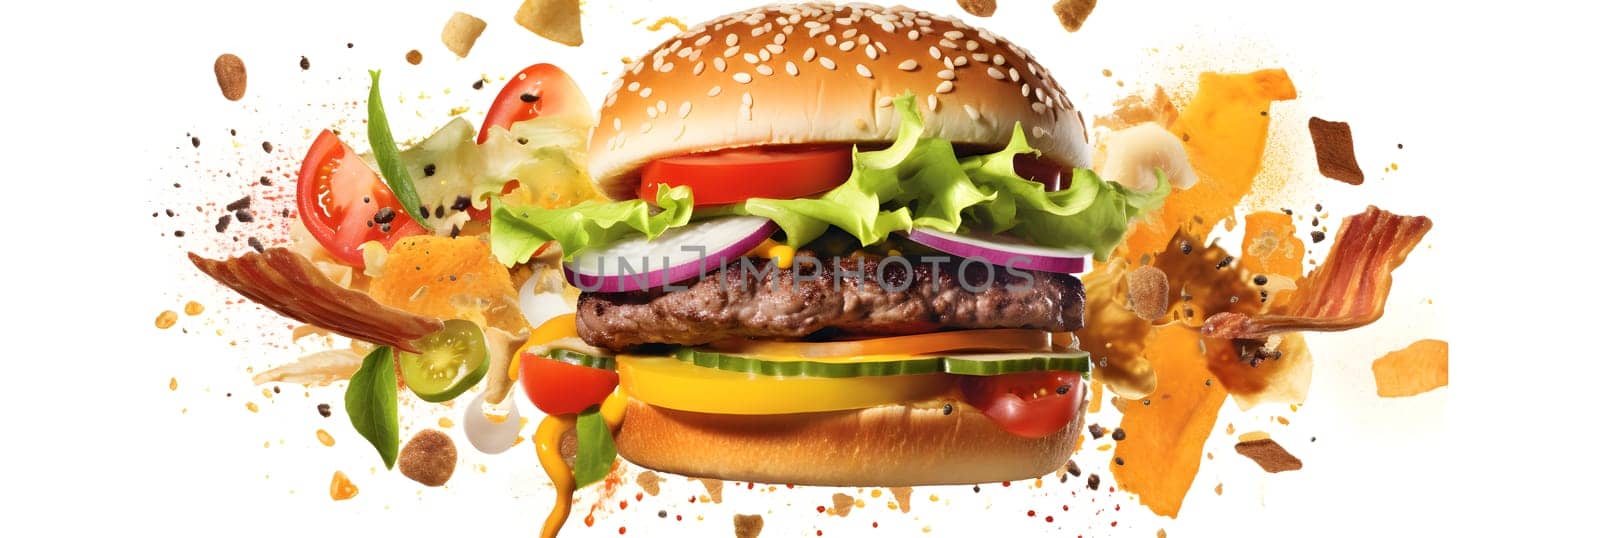 hamburger flying on white background, neural network generated photorealistic image by z1b